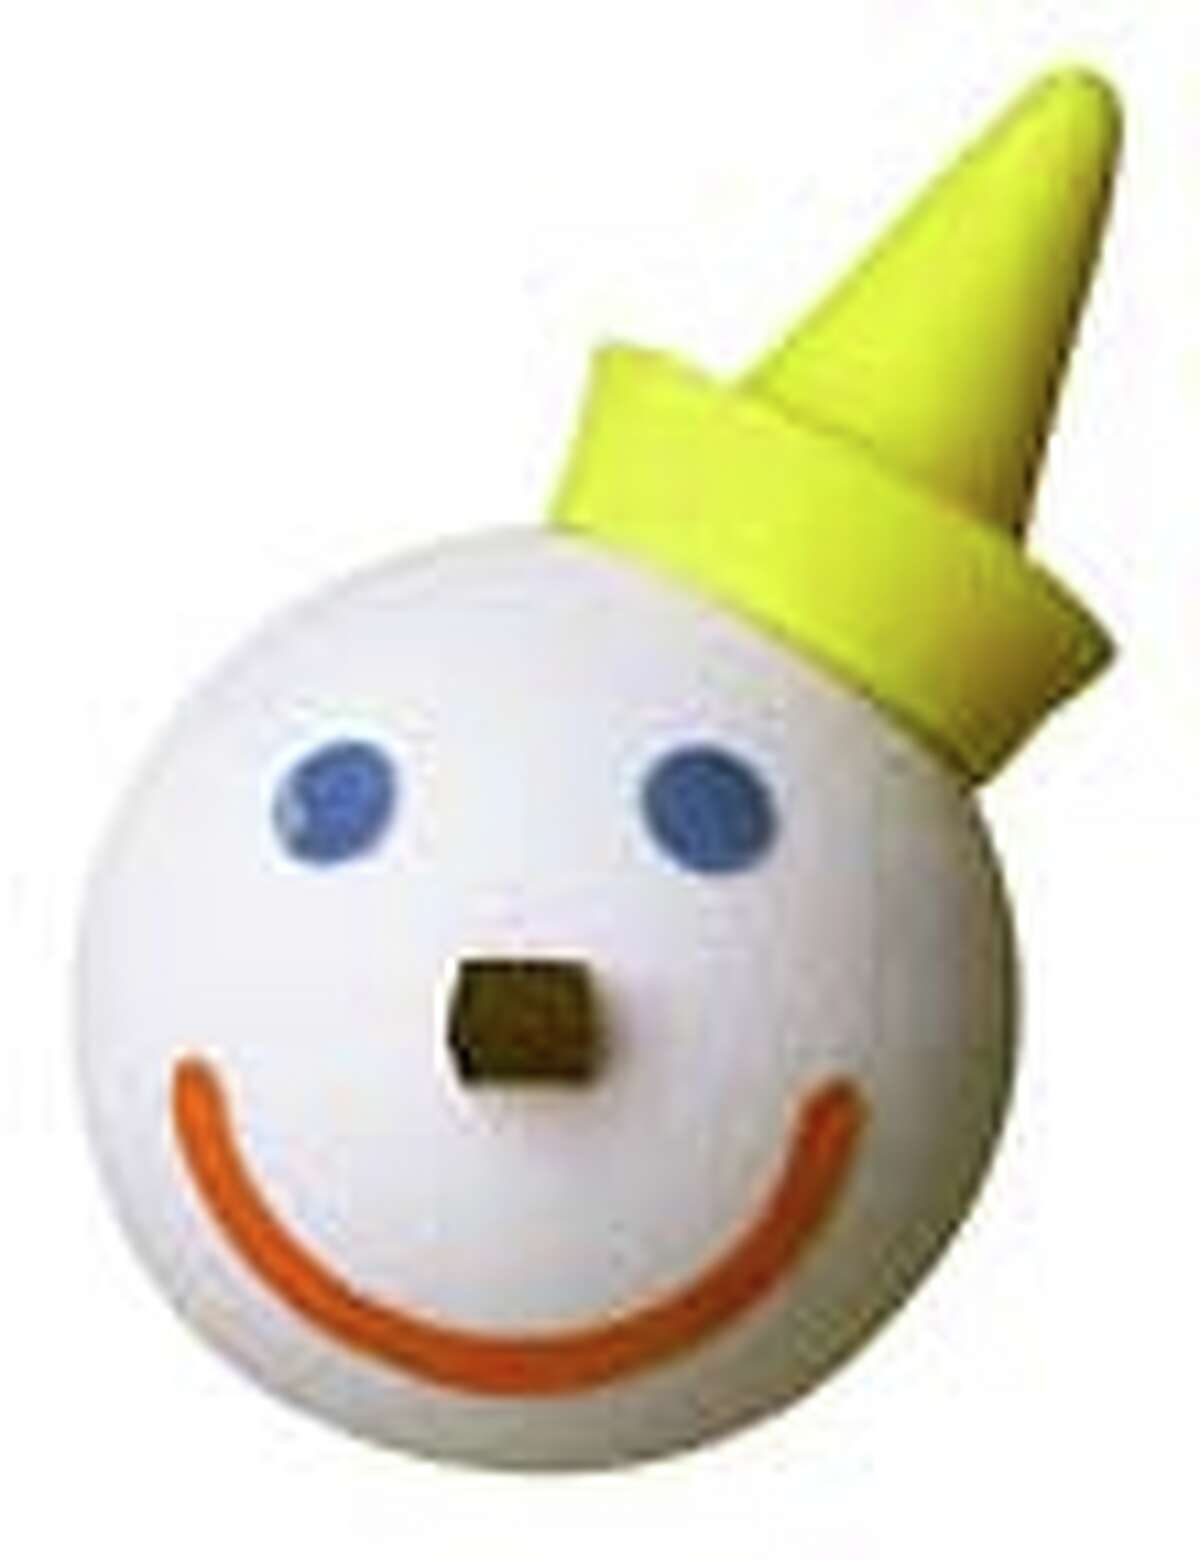 Jack, the antenna ball that started it all.